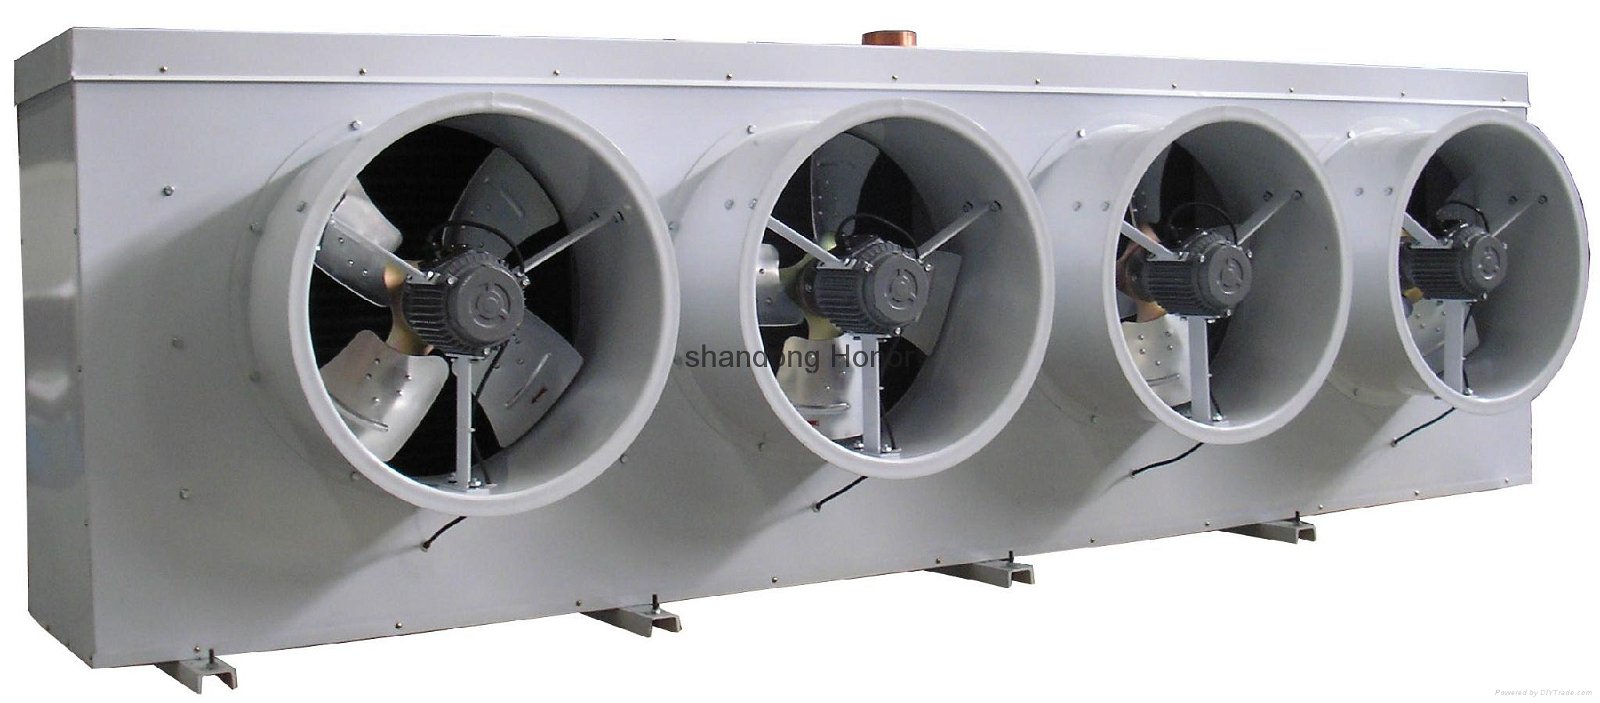   Industrial Evaporative Air Cooler for Cold Room 3